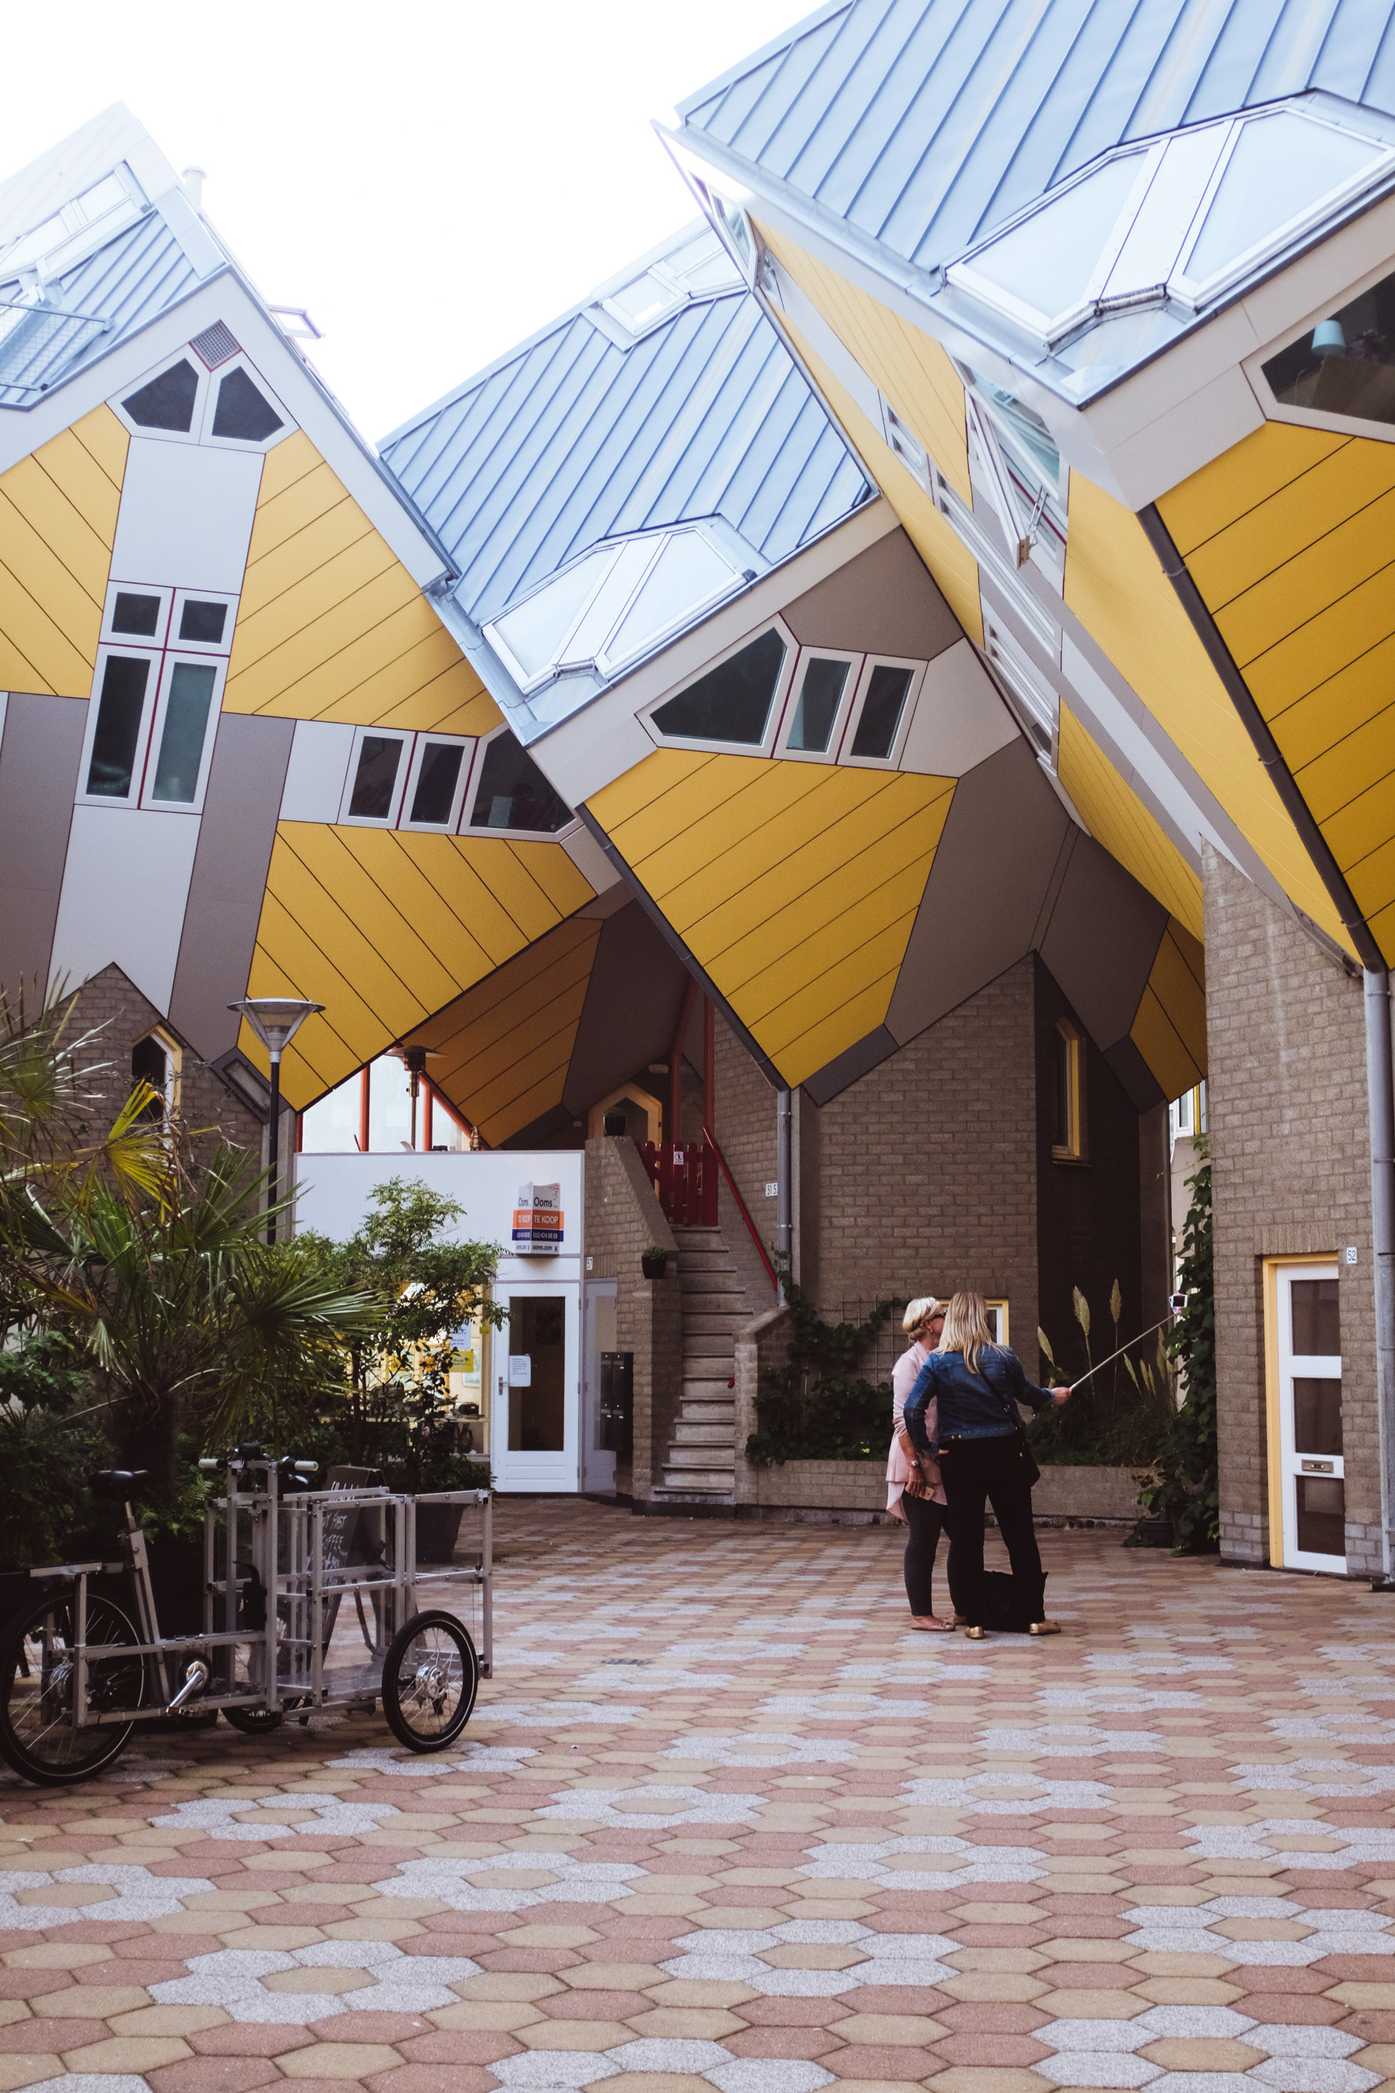 Two women take a selfie in the Cube Houses of Rotterdam